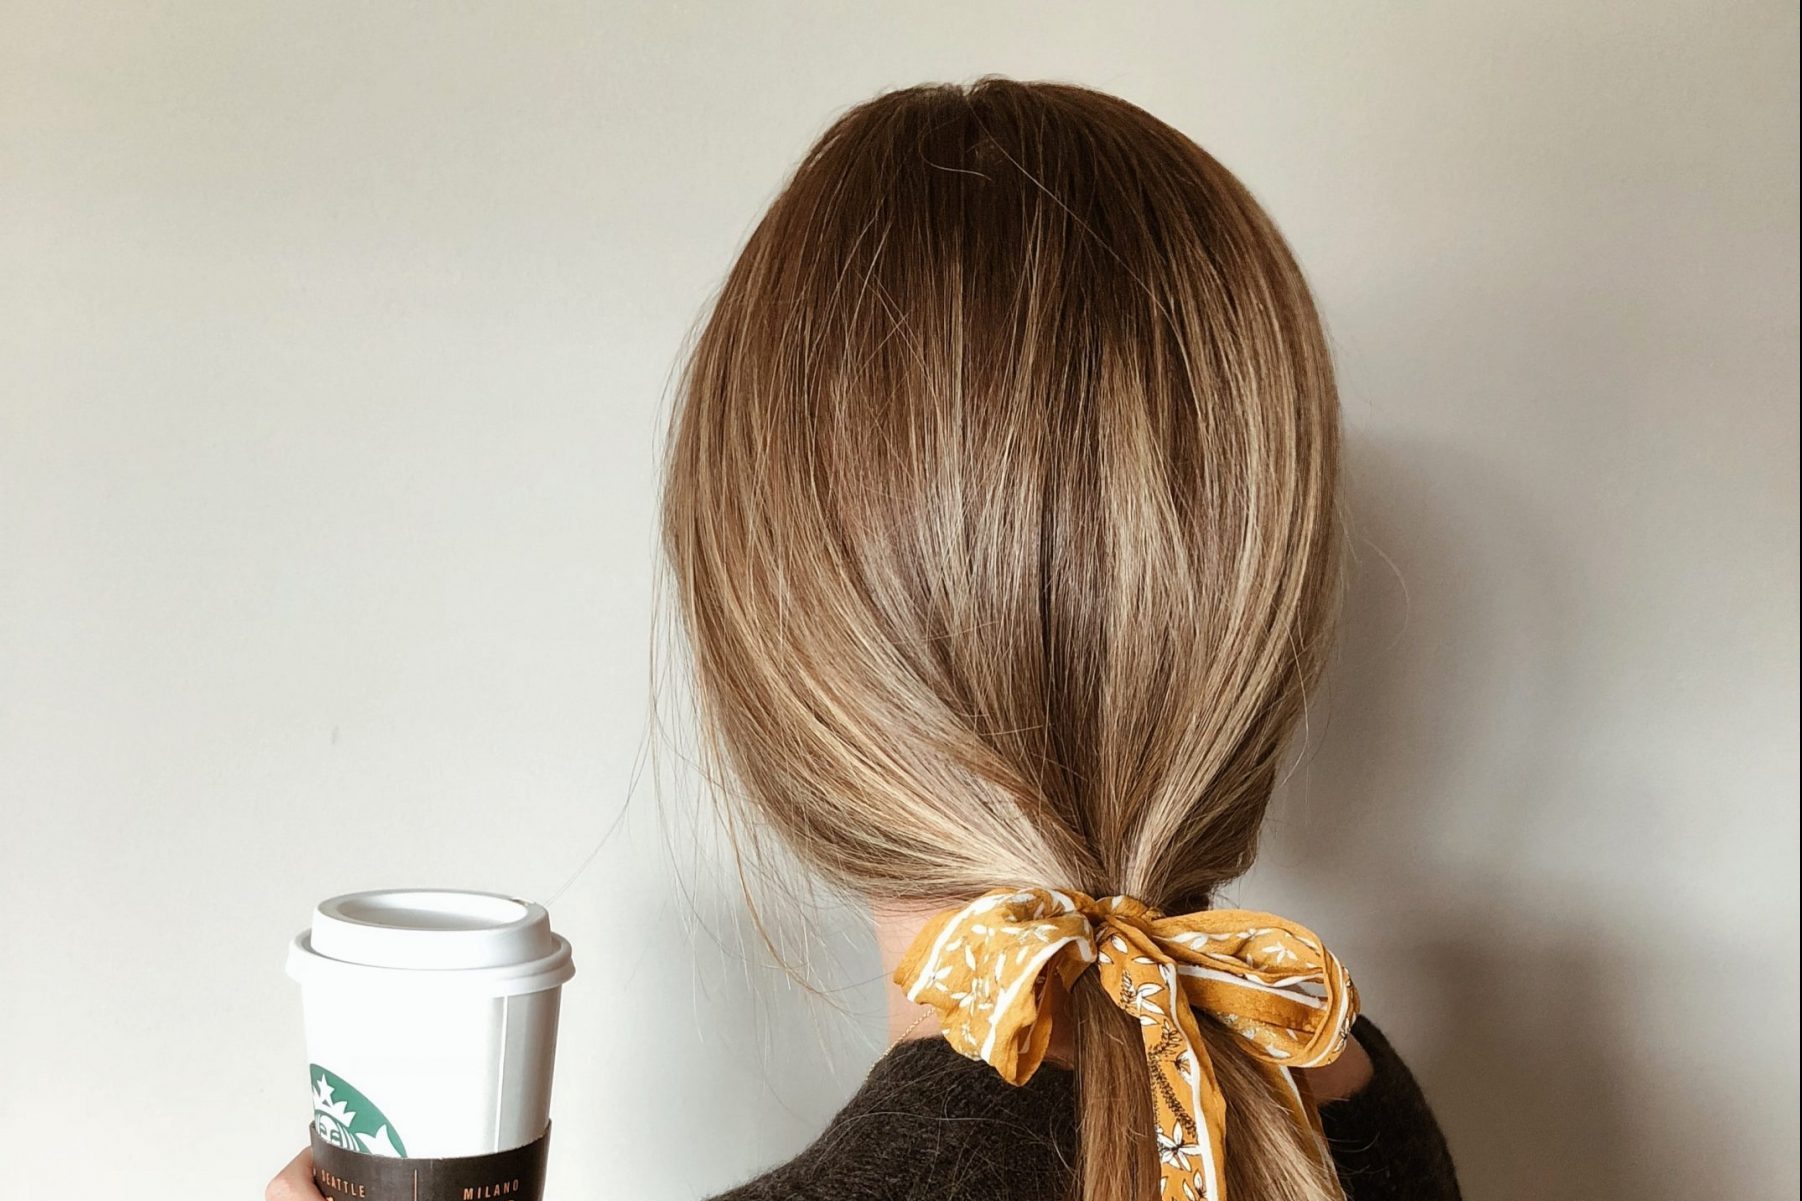 in article about hair, hair that is in a ponytail